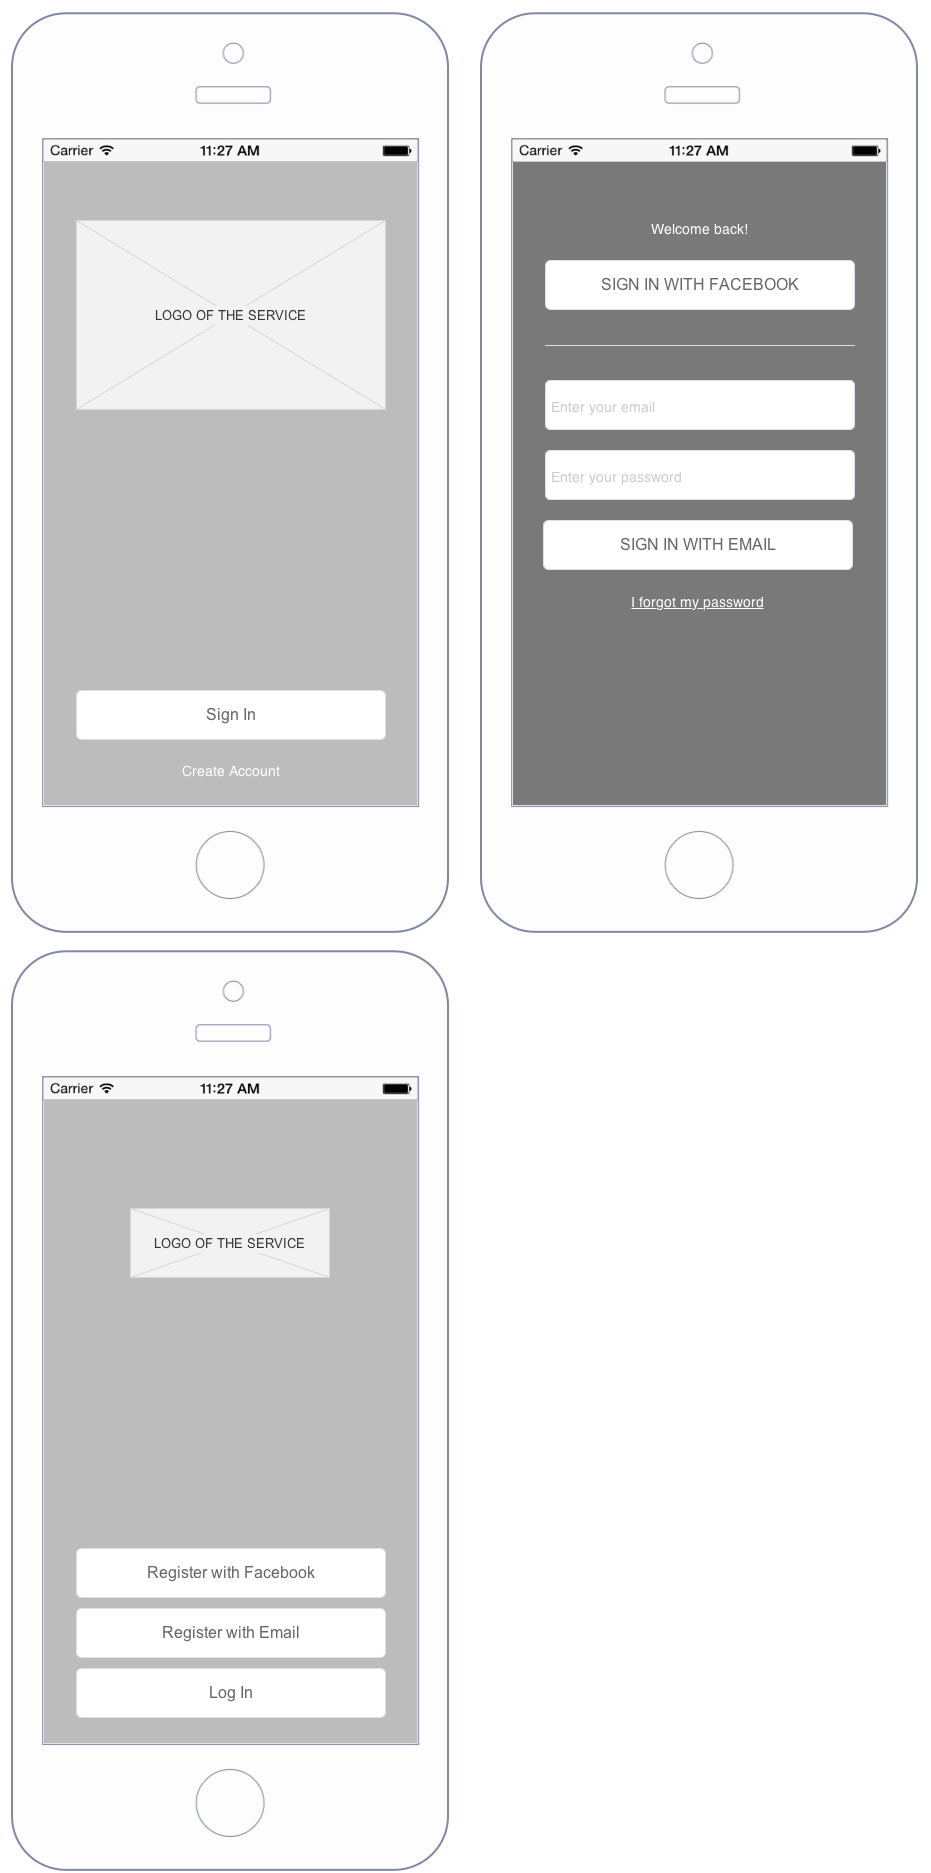 Totalwireframe 原型素材系列之 iPhone Apps Library [for Axure]插图(14)